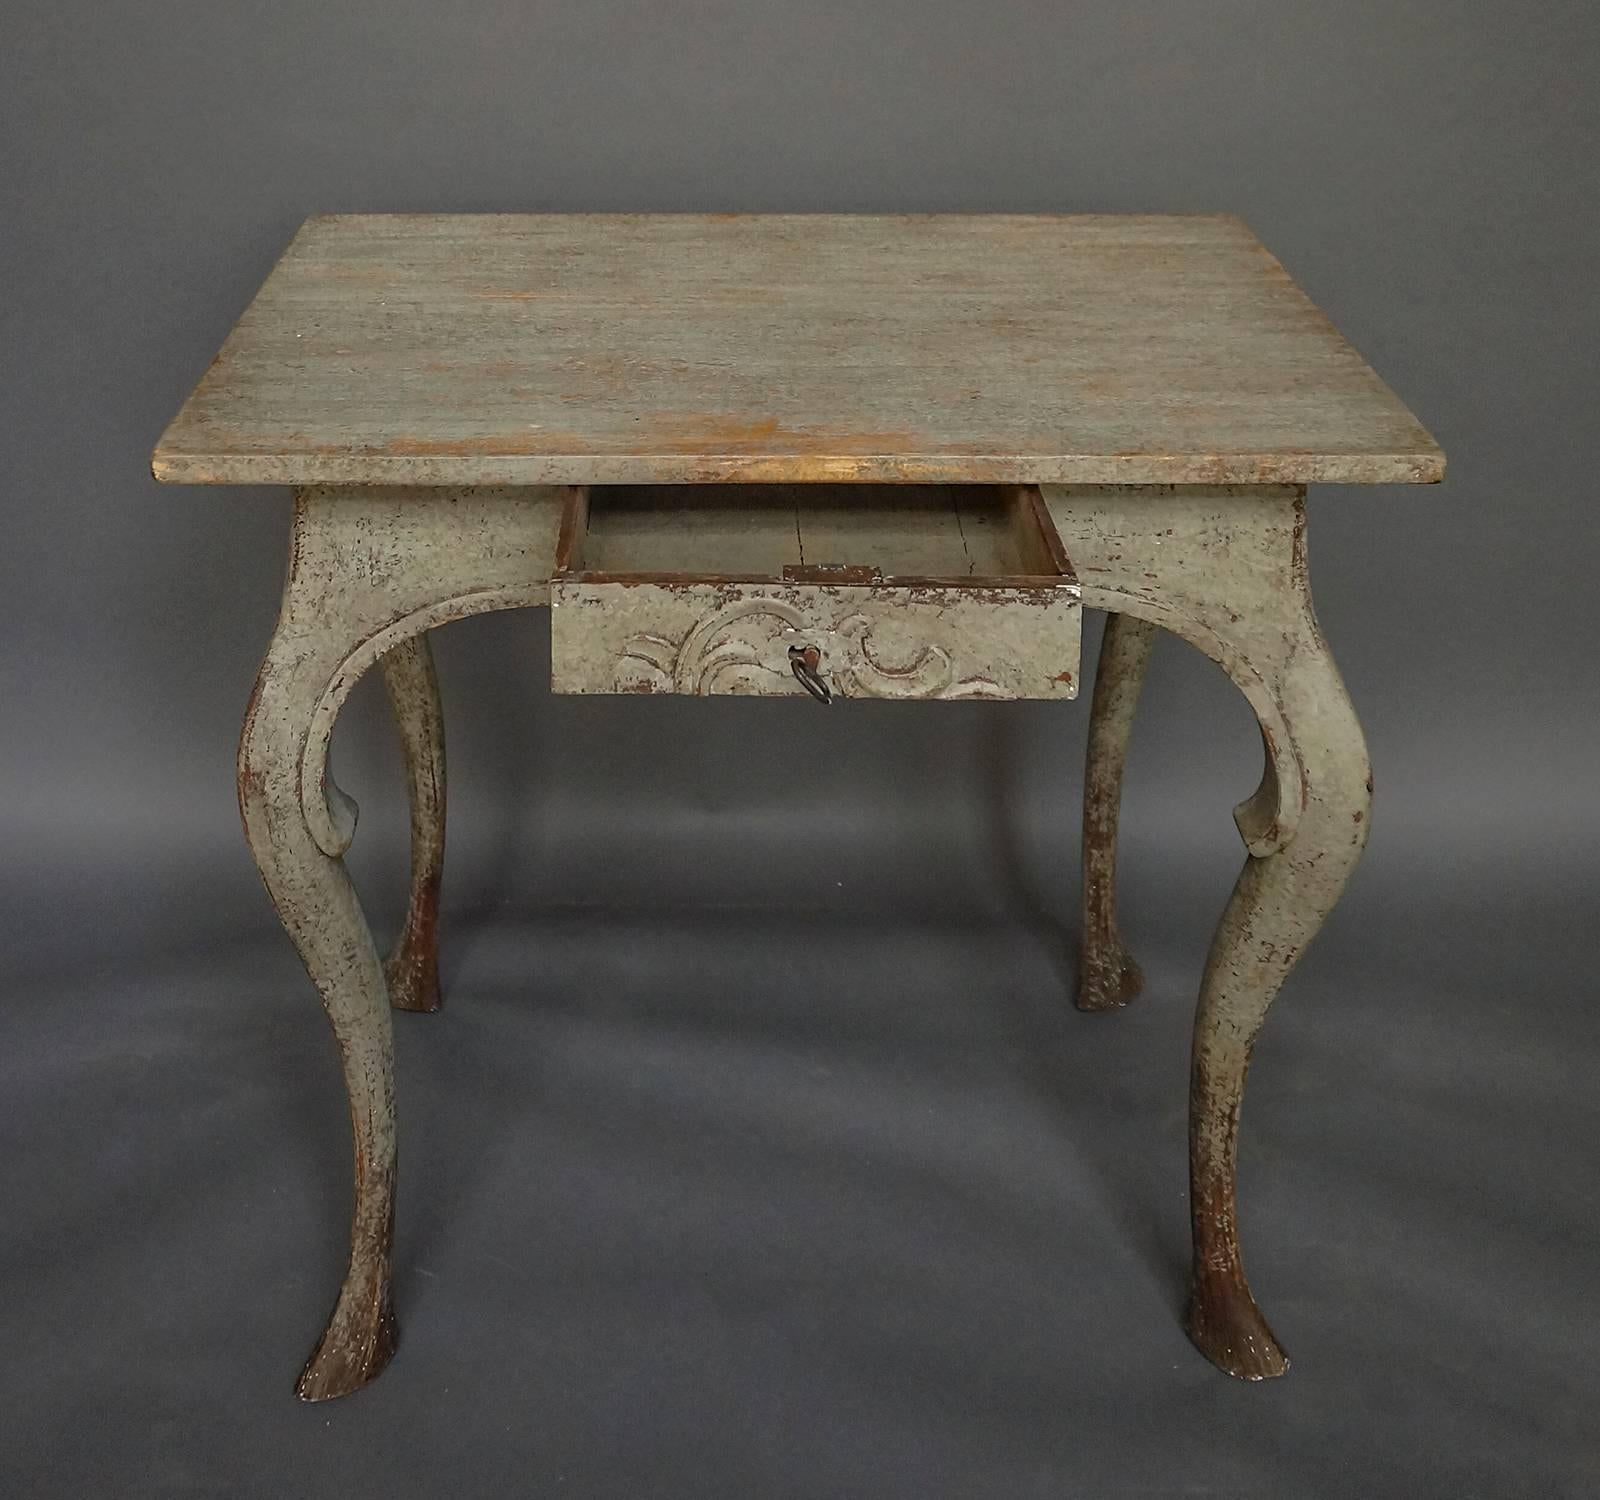 Very early Rococo side table, Sweden, circa 1700, which retains its original painted surface. Graceful carving on the front apron spans the single locking drawer. Freestanding (finished on all sides).